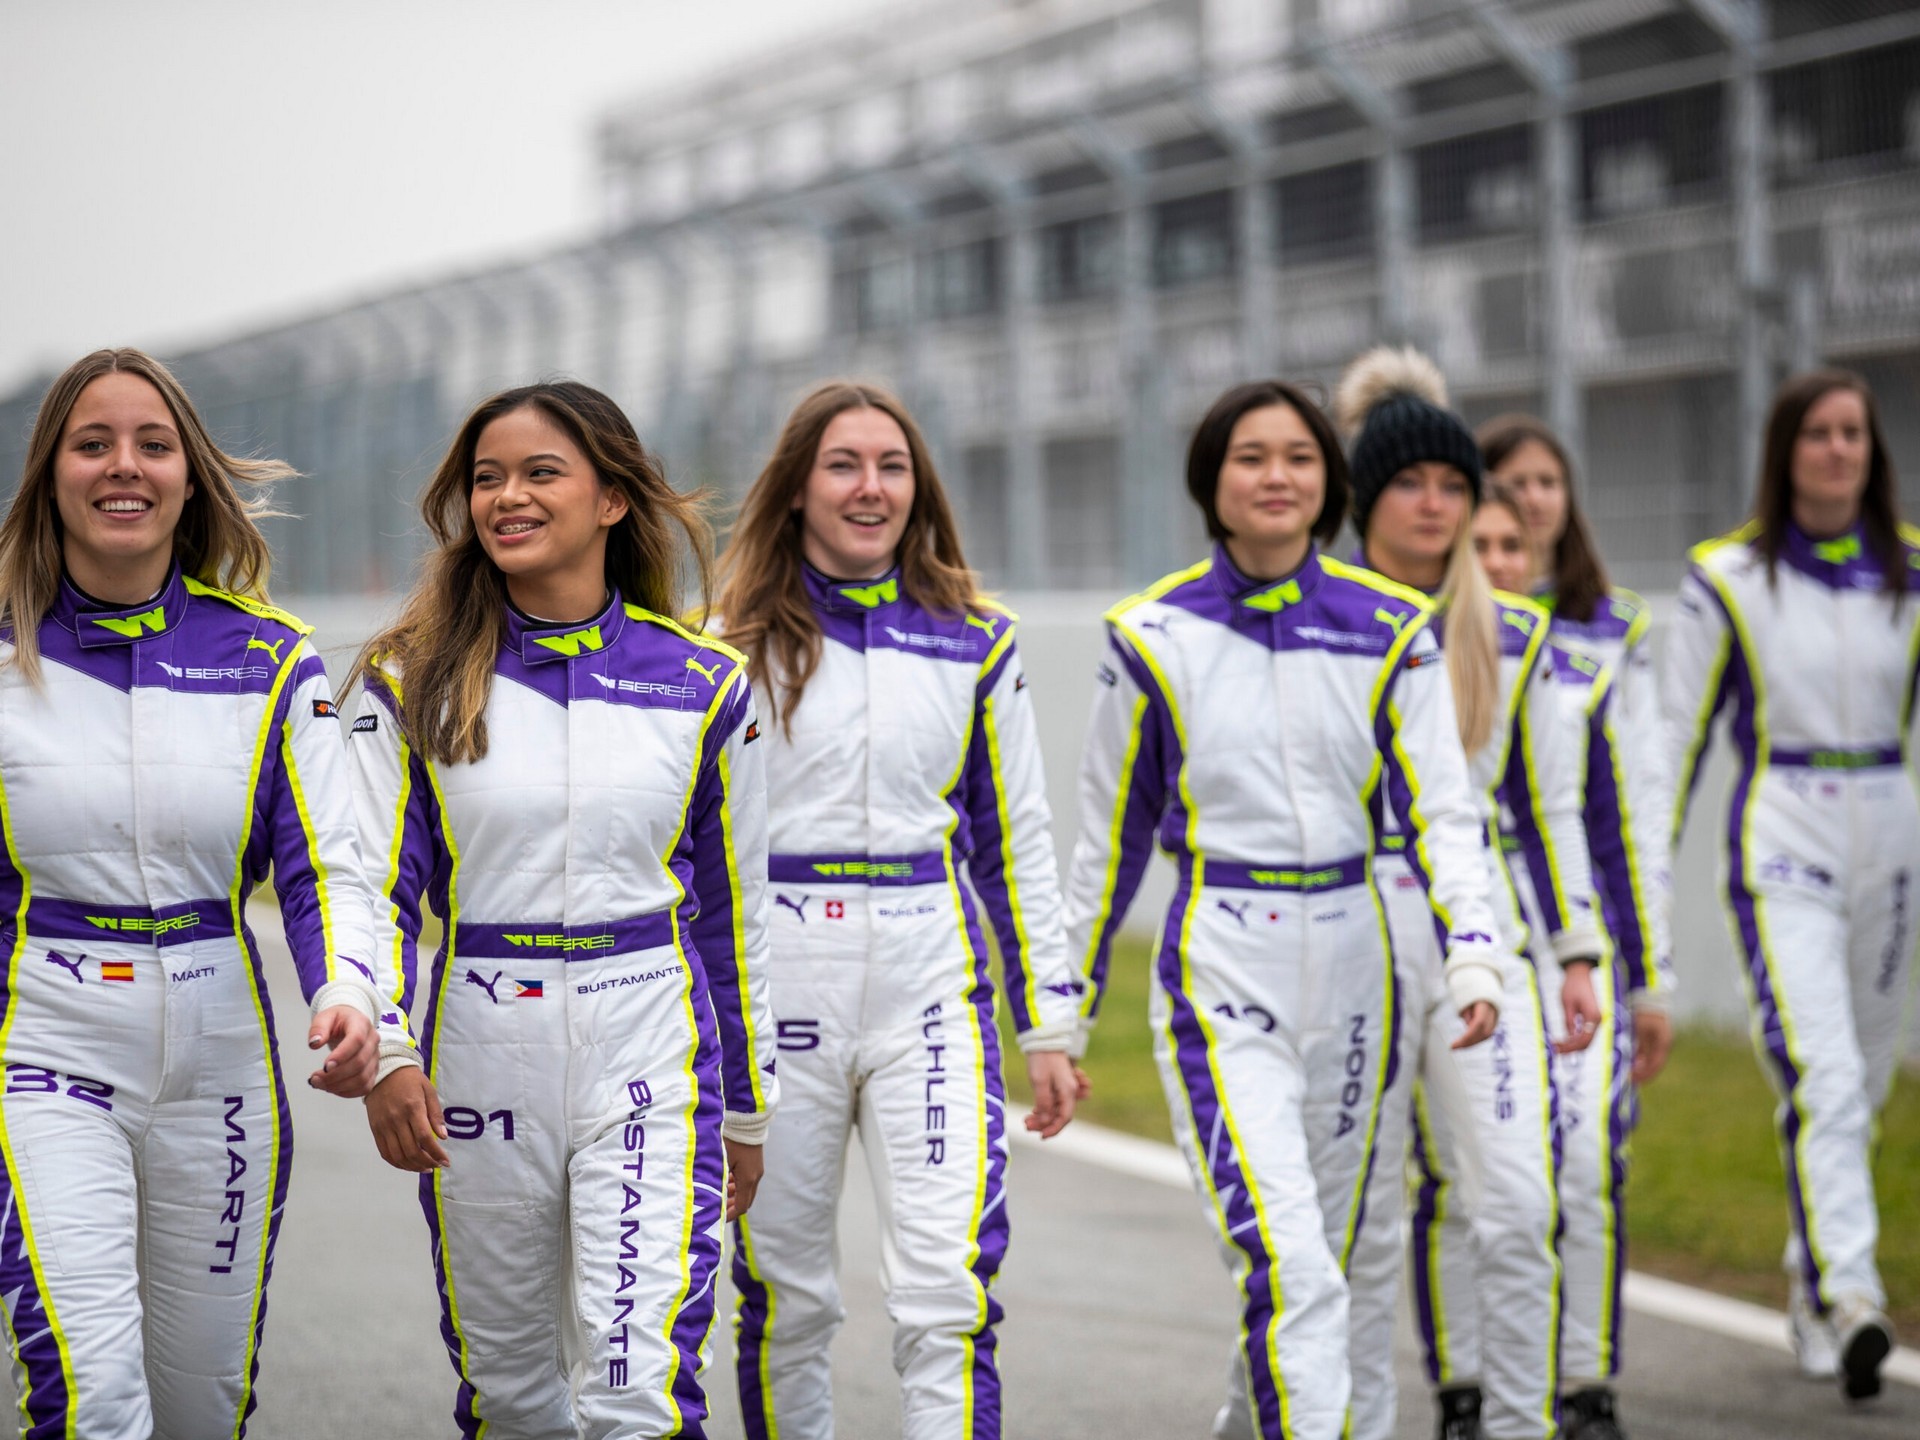 f1-academy-debuts-in-2023-as-a-formula-1-endorsed-women-only